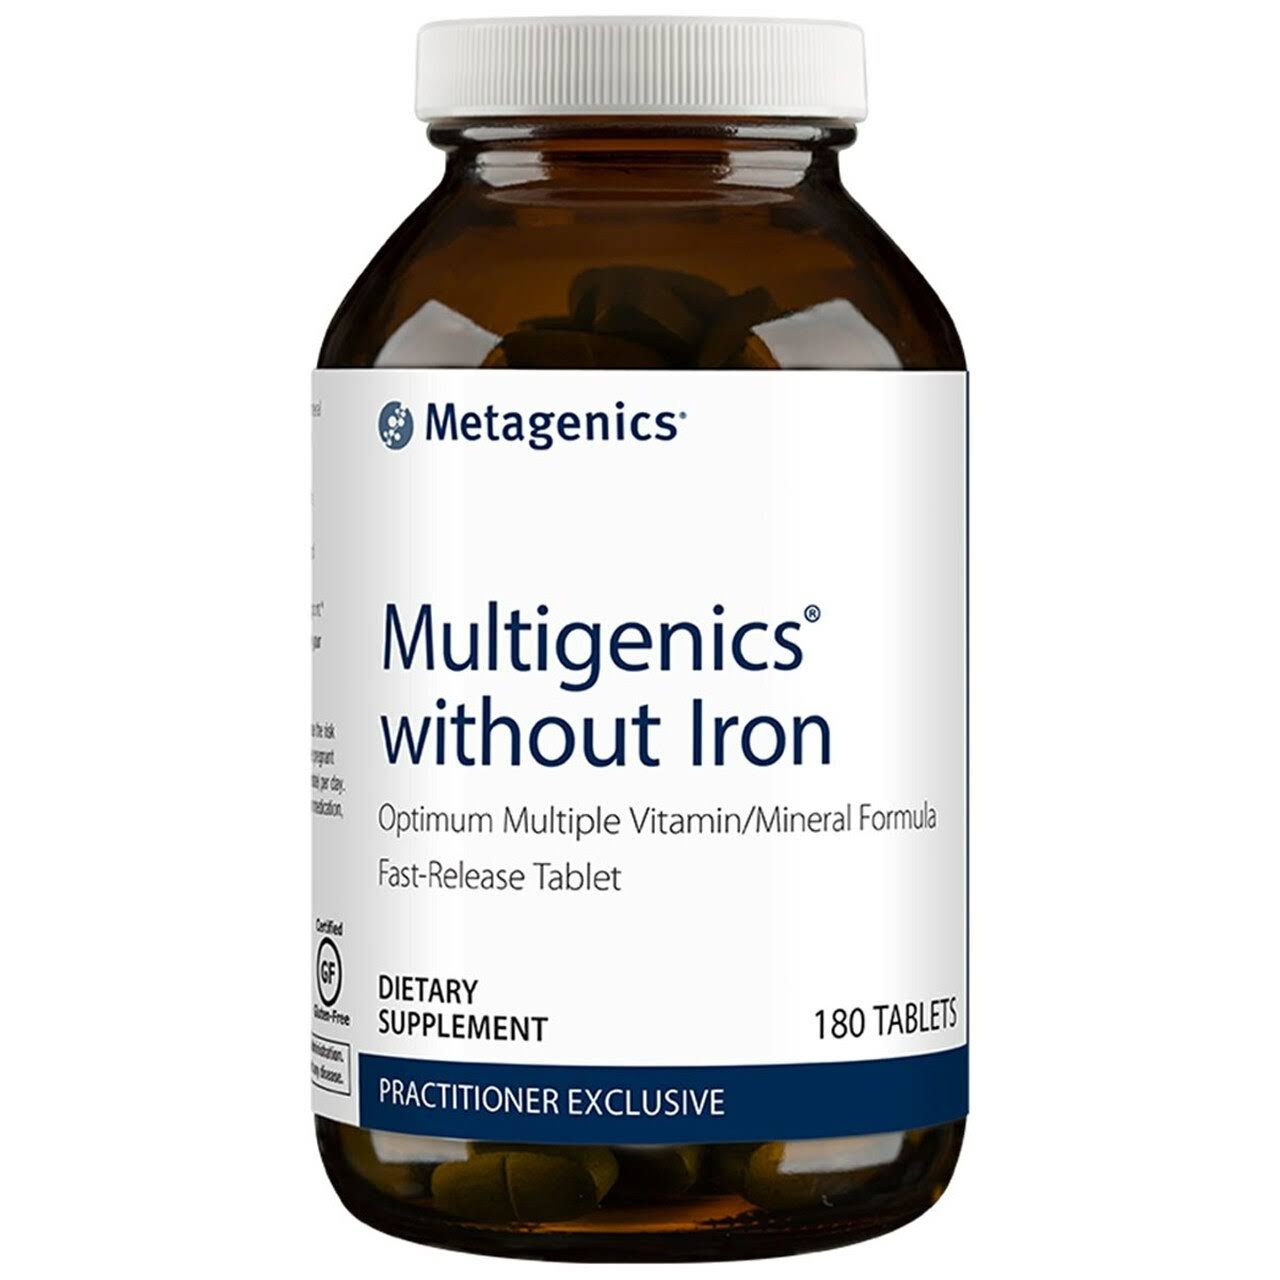 Metagenics Multigenics Intensive Care Without Iron - 180 Tablets